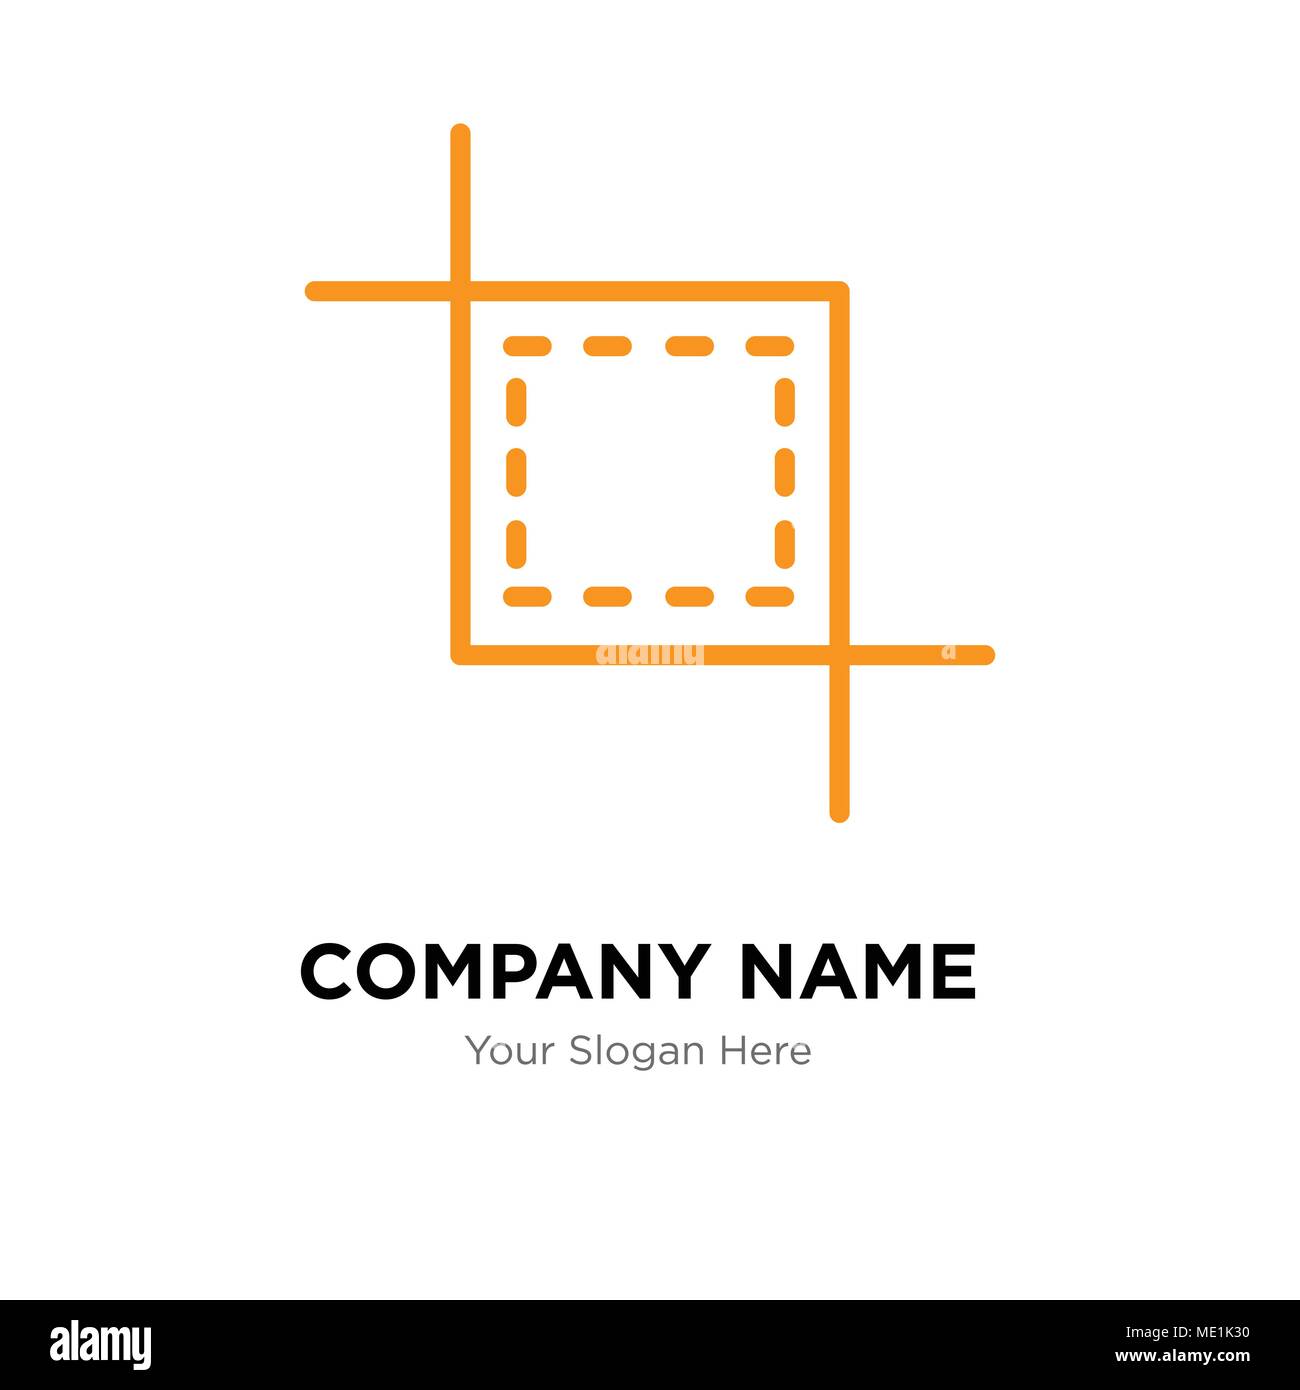 Cropping tool company logo design template, Business corporate vector icon Stock Vector